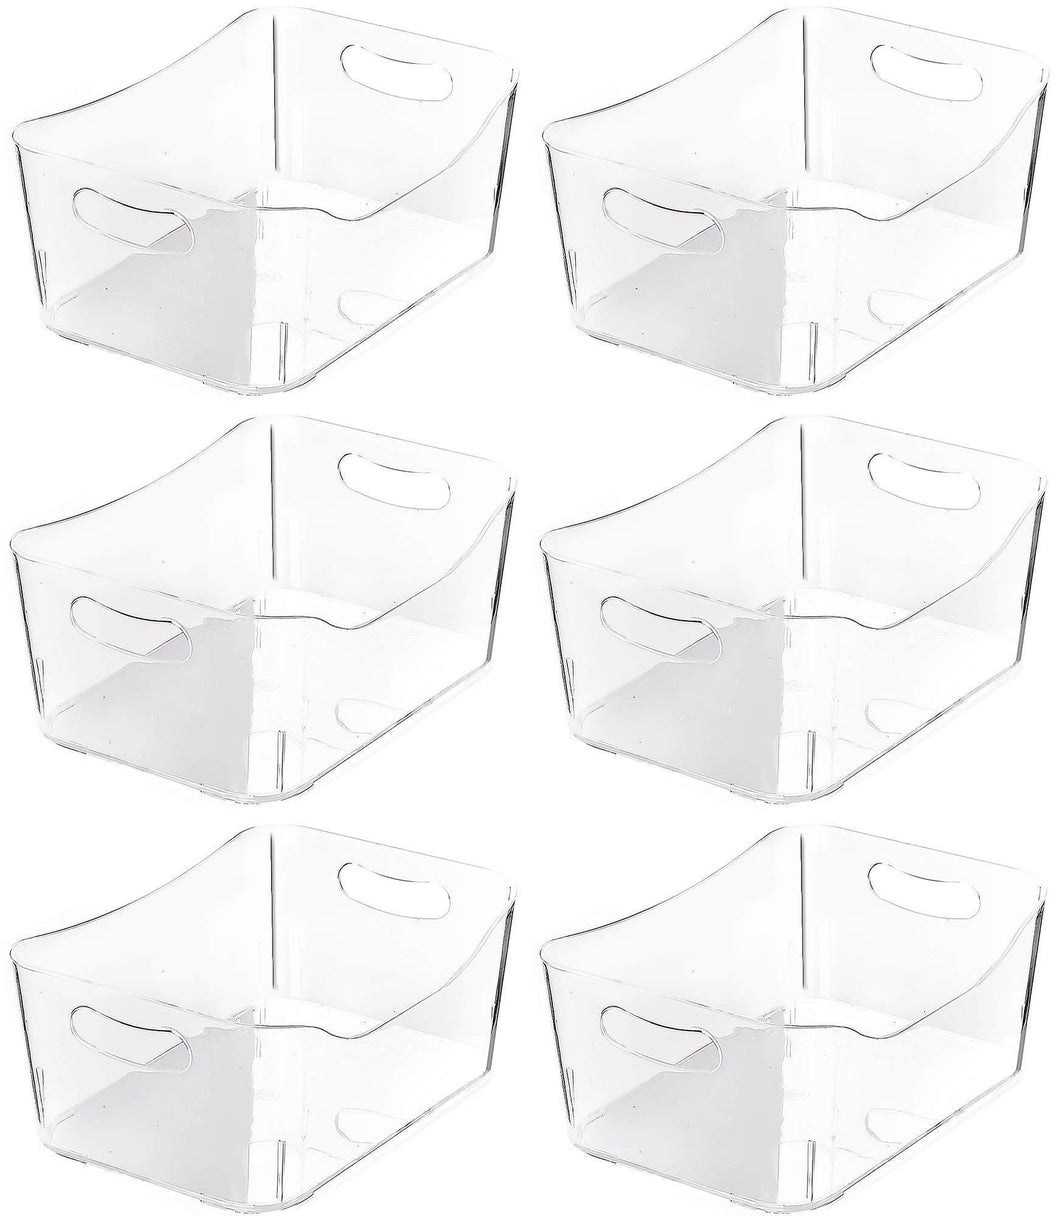 YBM HOME Open BIN Storage Basket Kitchen Pantry, Bathroom Vanity, Laundry, Health and Beauty Product Supply Organizer, Under Cabinet Caddy (Medium - 6 Pack, Clear)